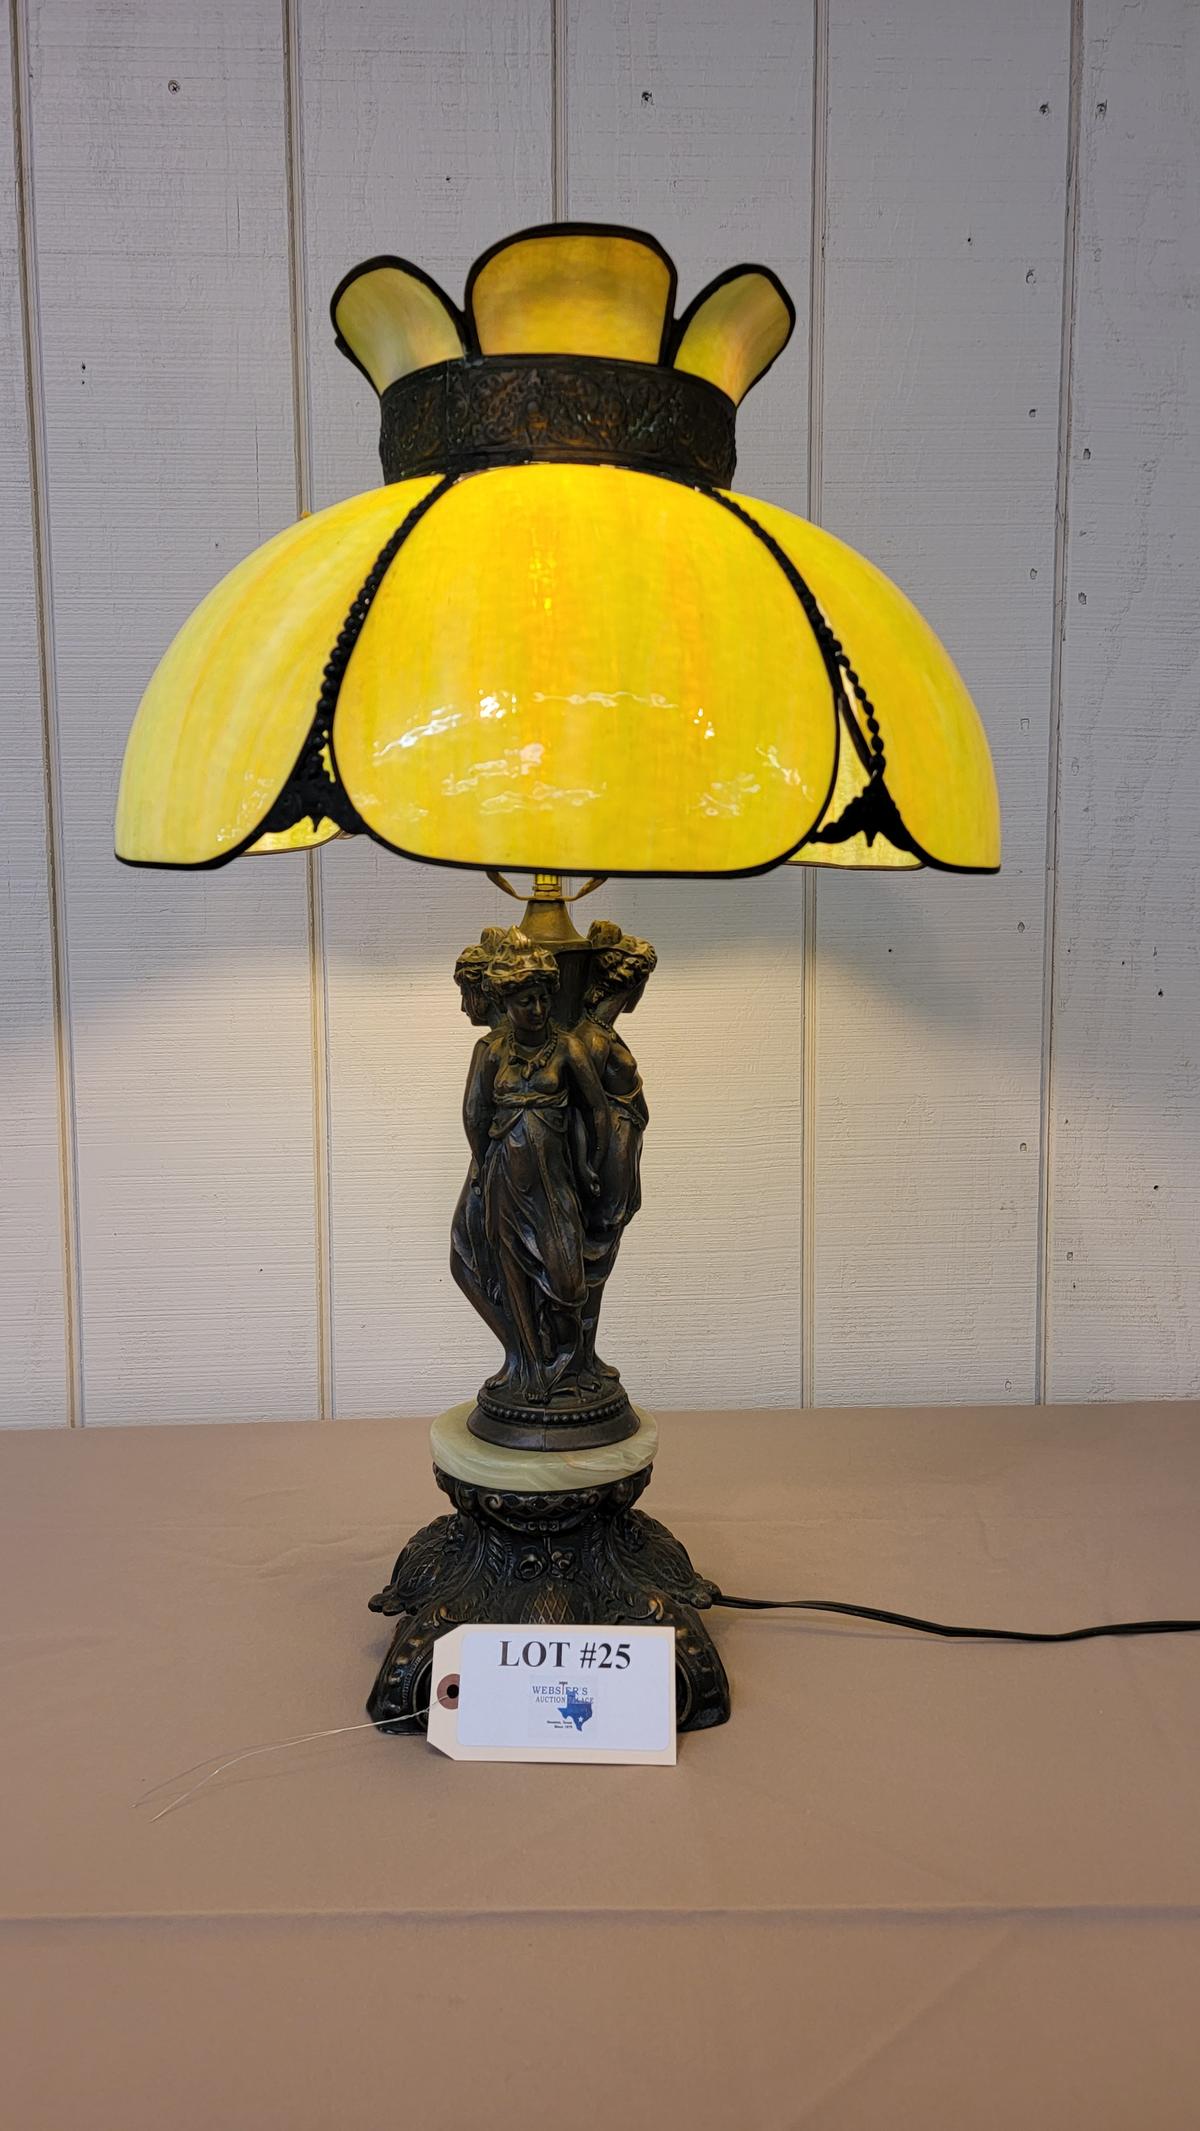 ANTIQUE BRONZE LAMP WITH MARBLE INSERT IN BASE AND SLAG GLASS SHADE